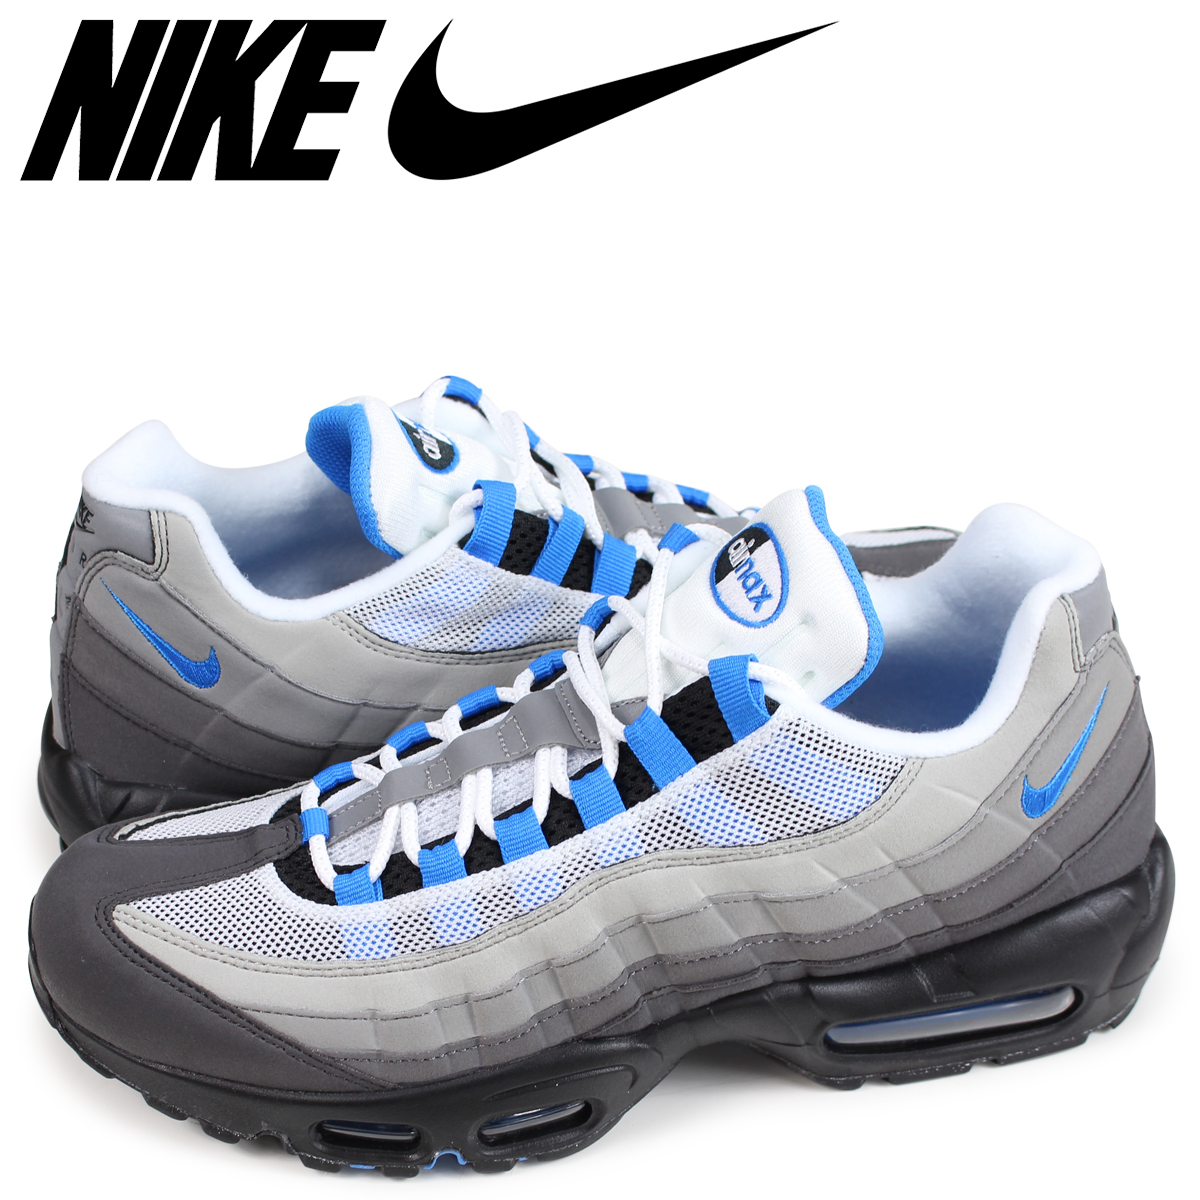 air max 95 crystal blue release date